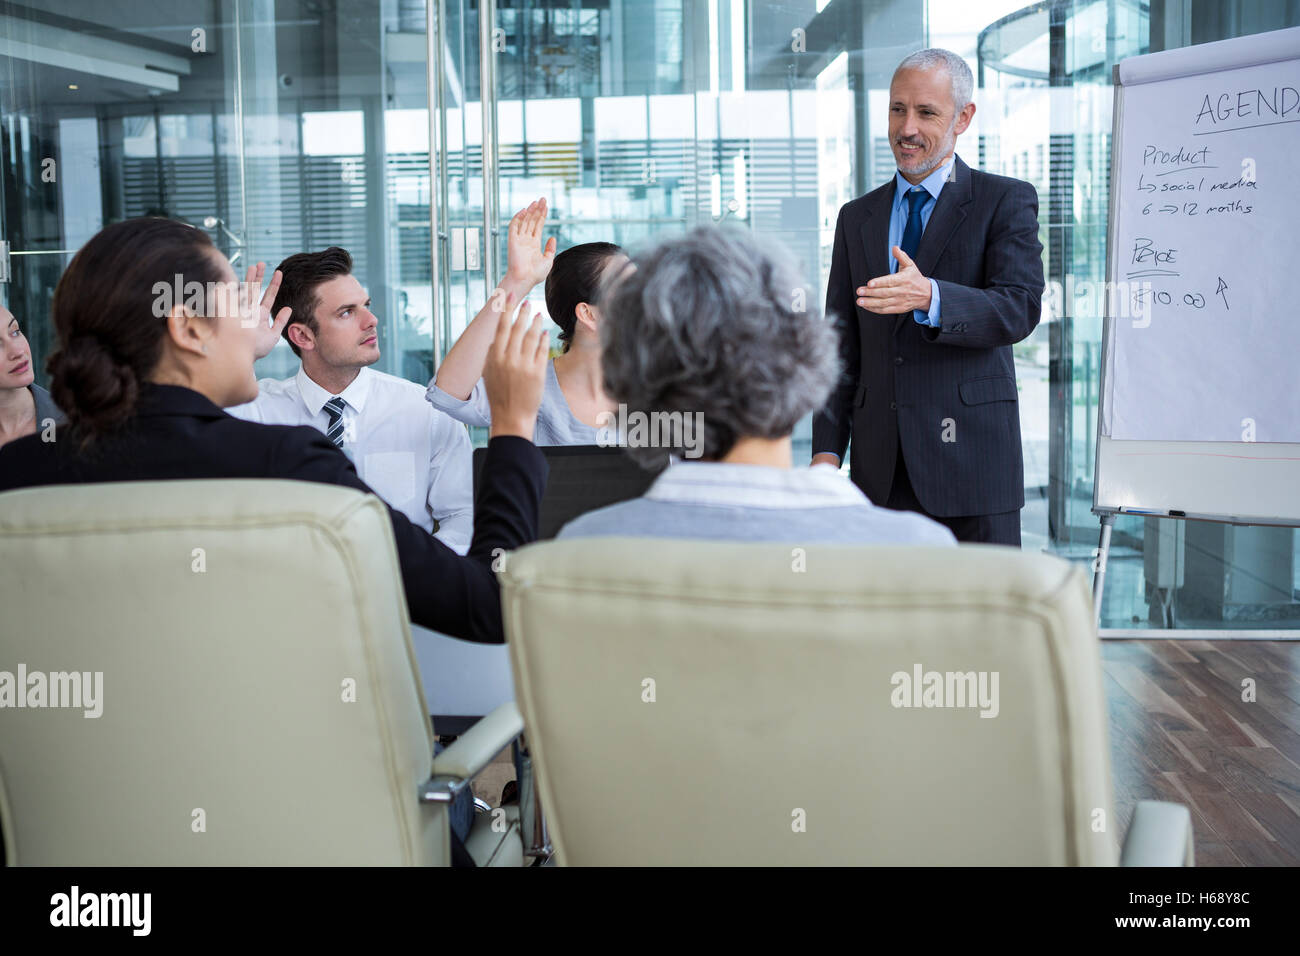 Businessman interacting with coworkers Stock Photo